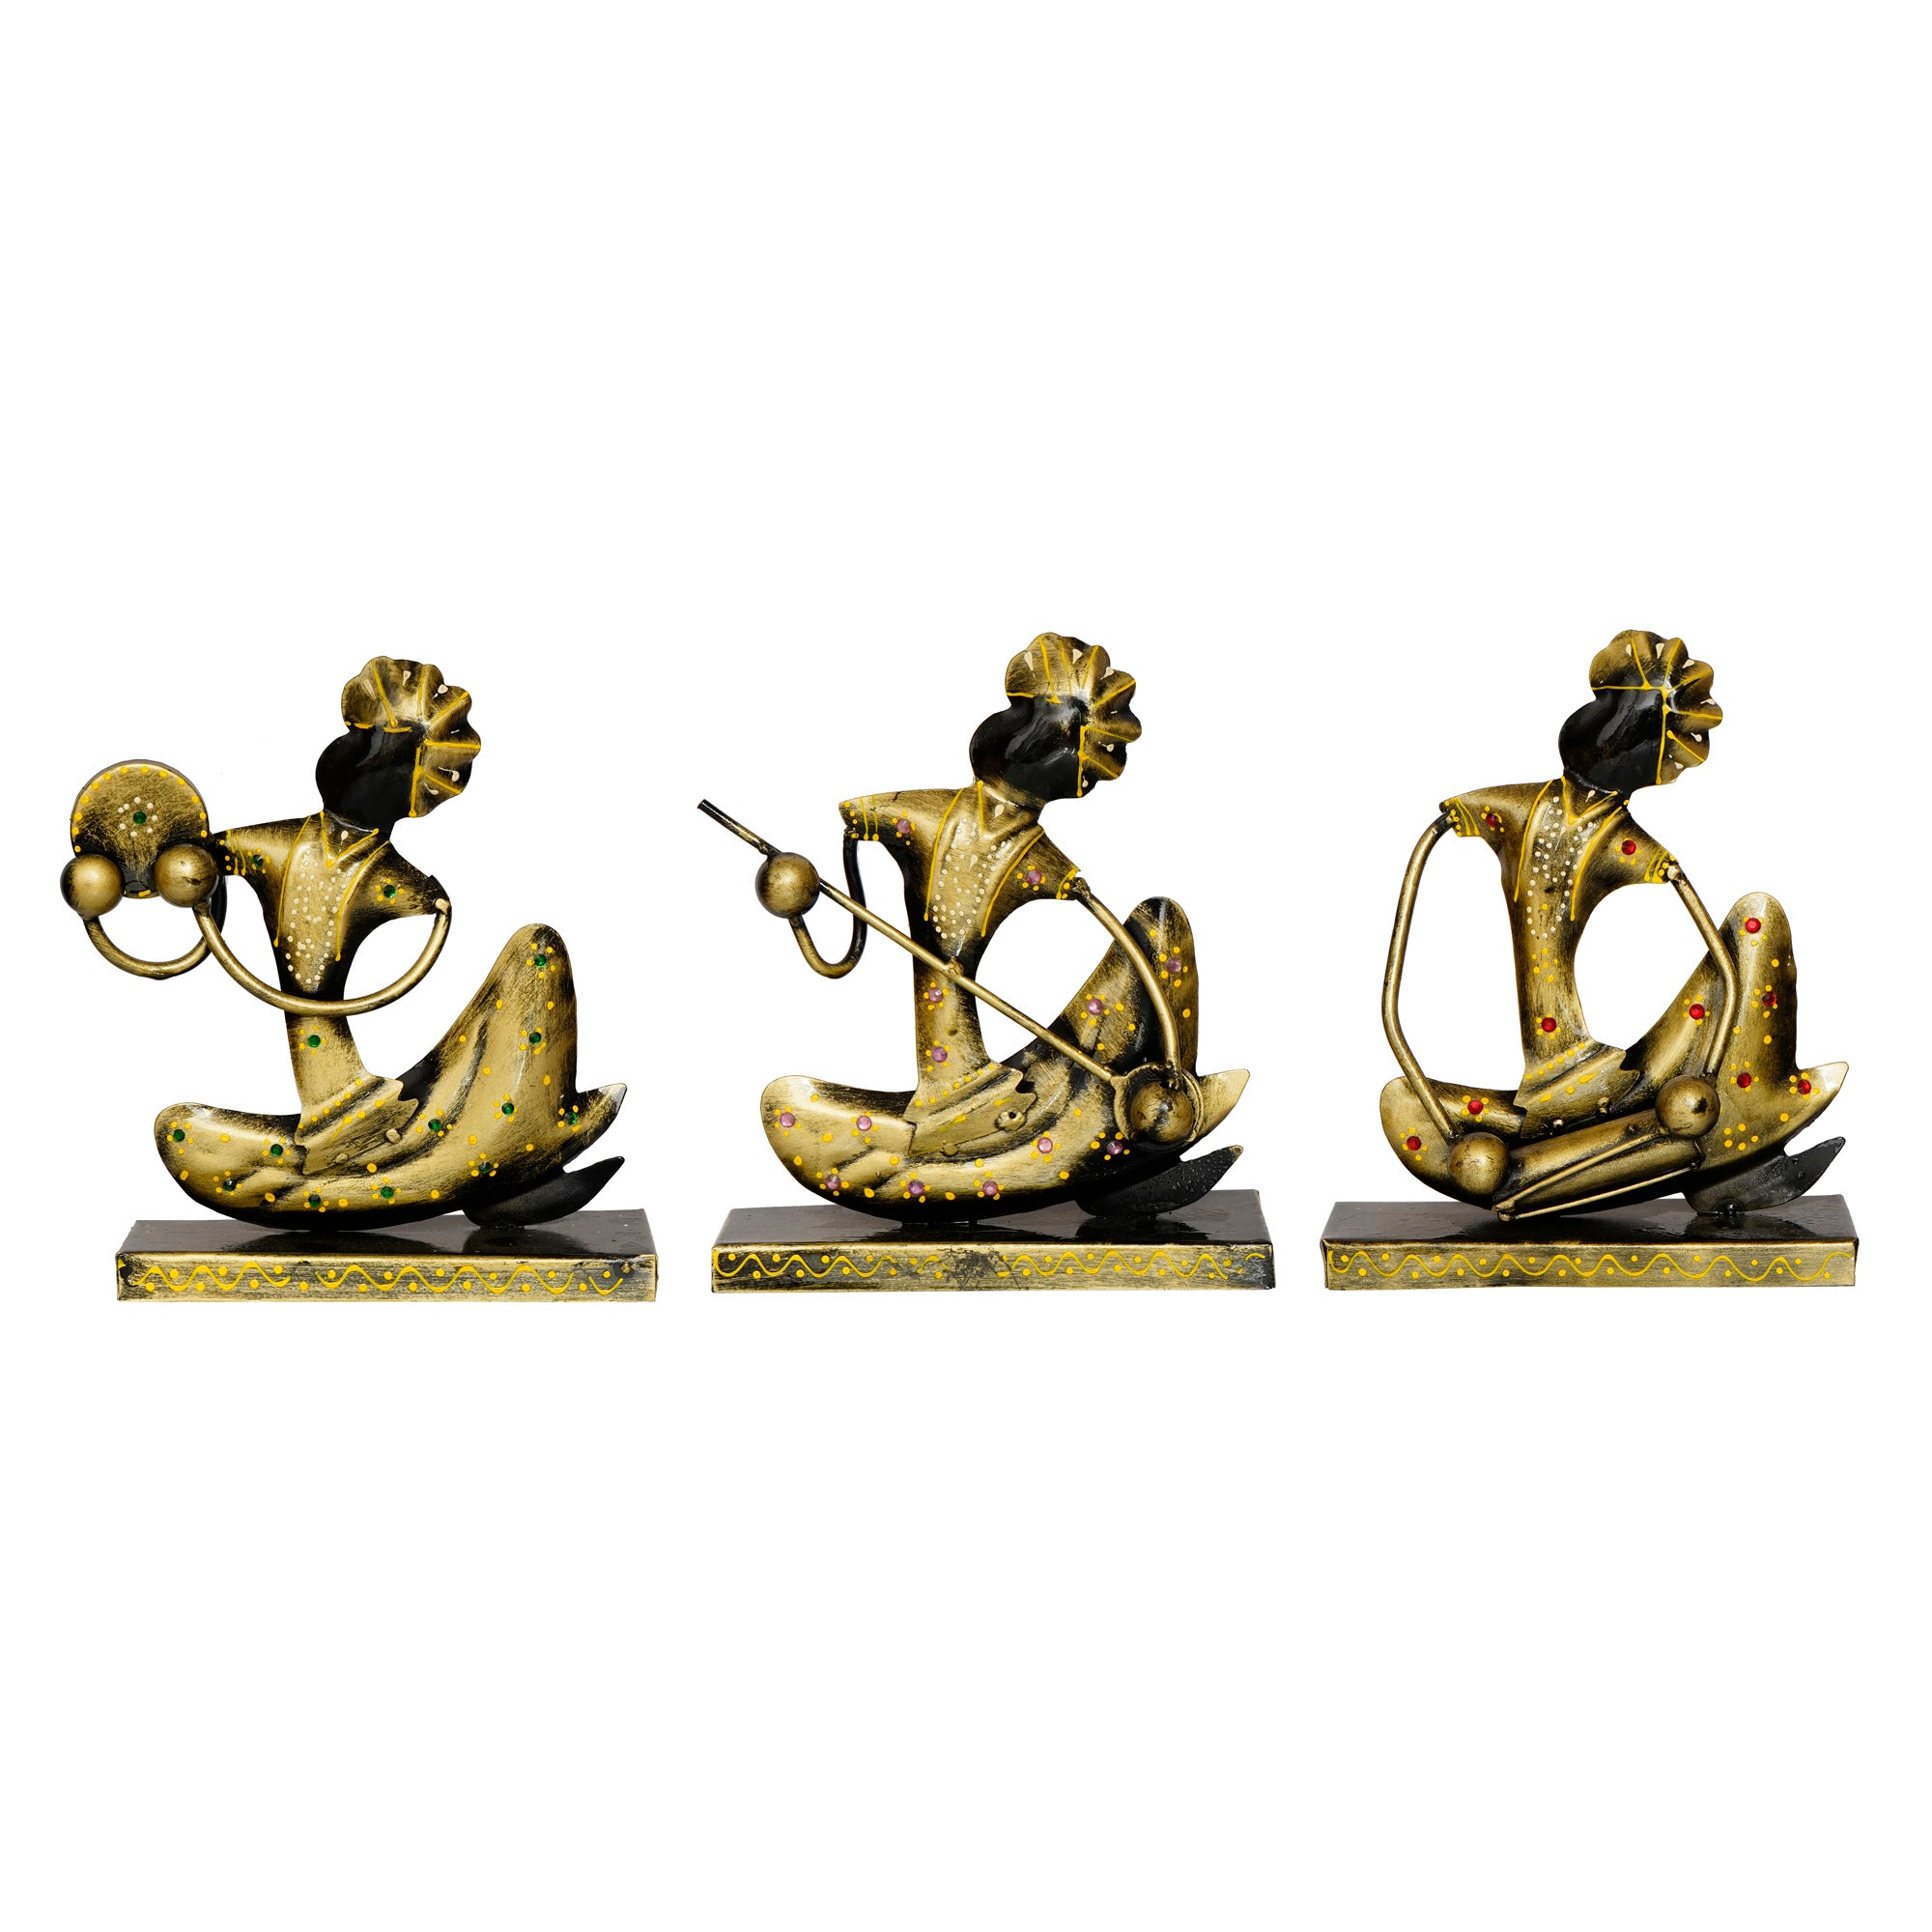 Iron Set of 3 Tribal Man Figurines with Paghdi Playing Tambourine/Dafli, Banjo, Dholak Musical Instruments Decorative Showpiece (Golden and Black) 2